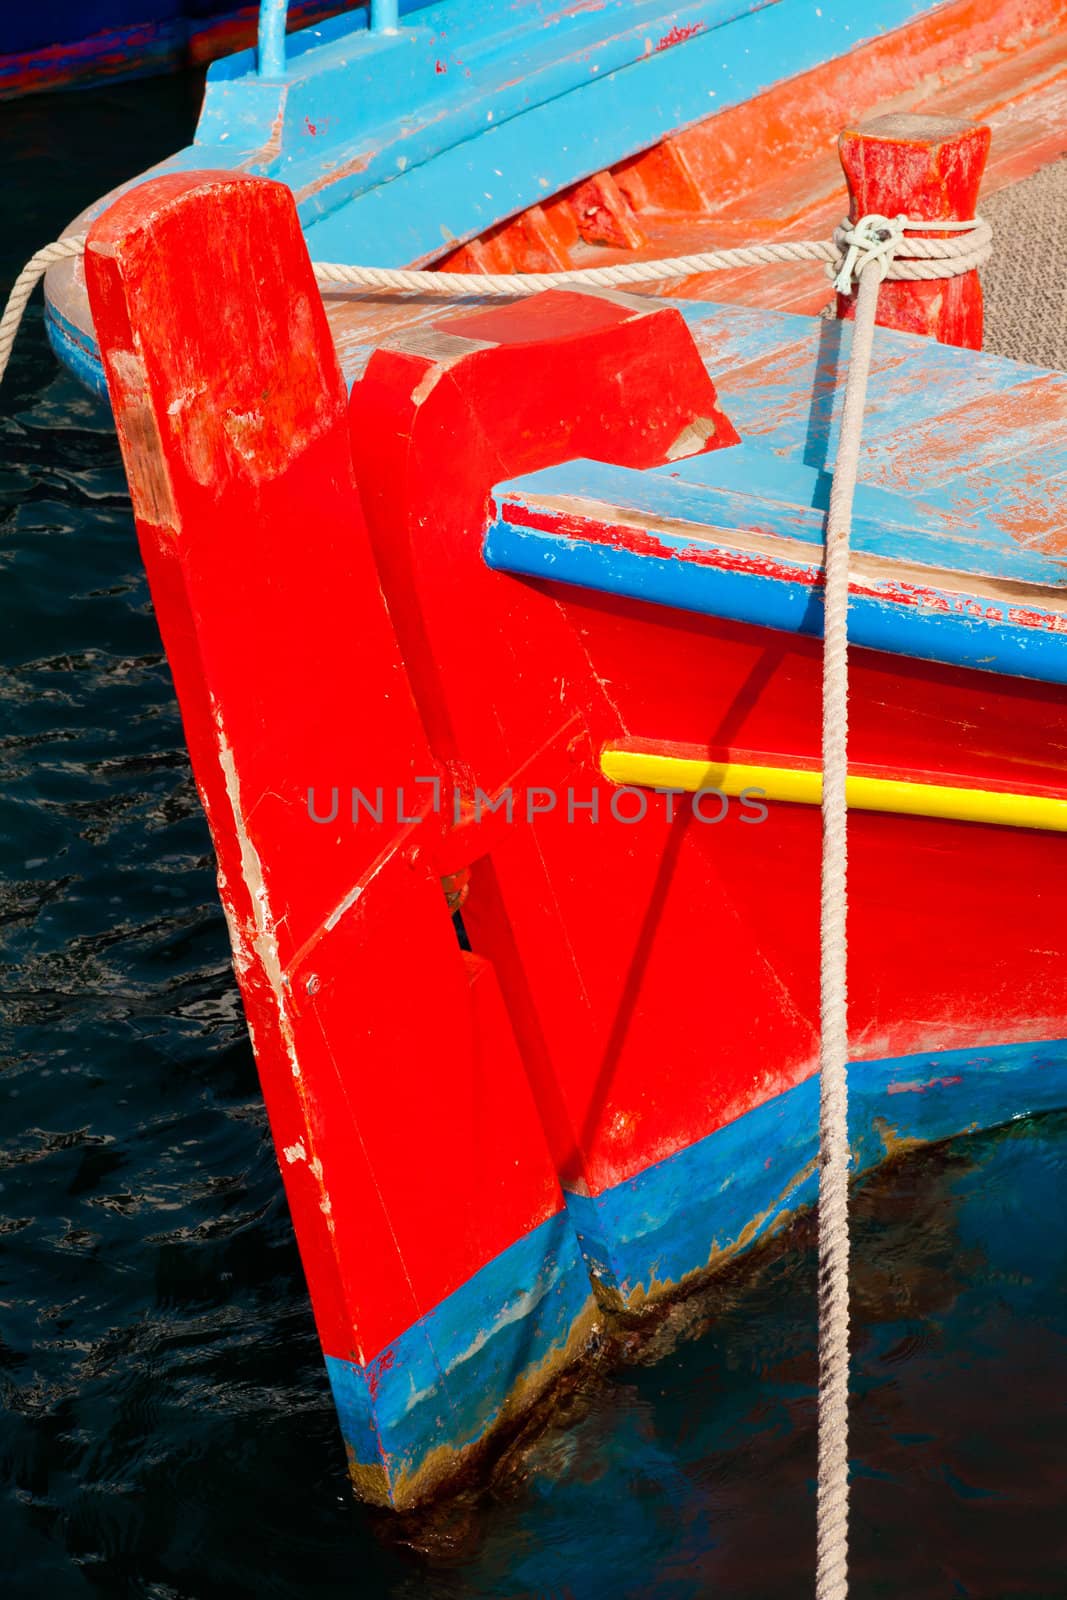 Red Stern and Rudder of Greek Fishing Boat by PiLens